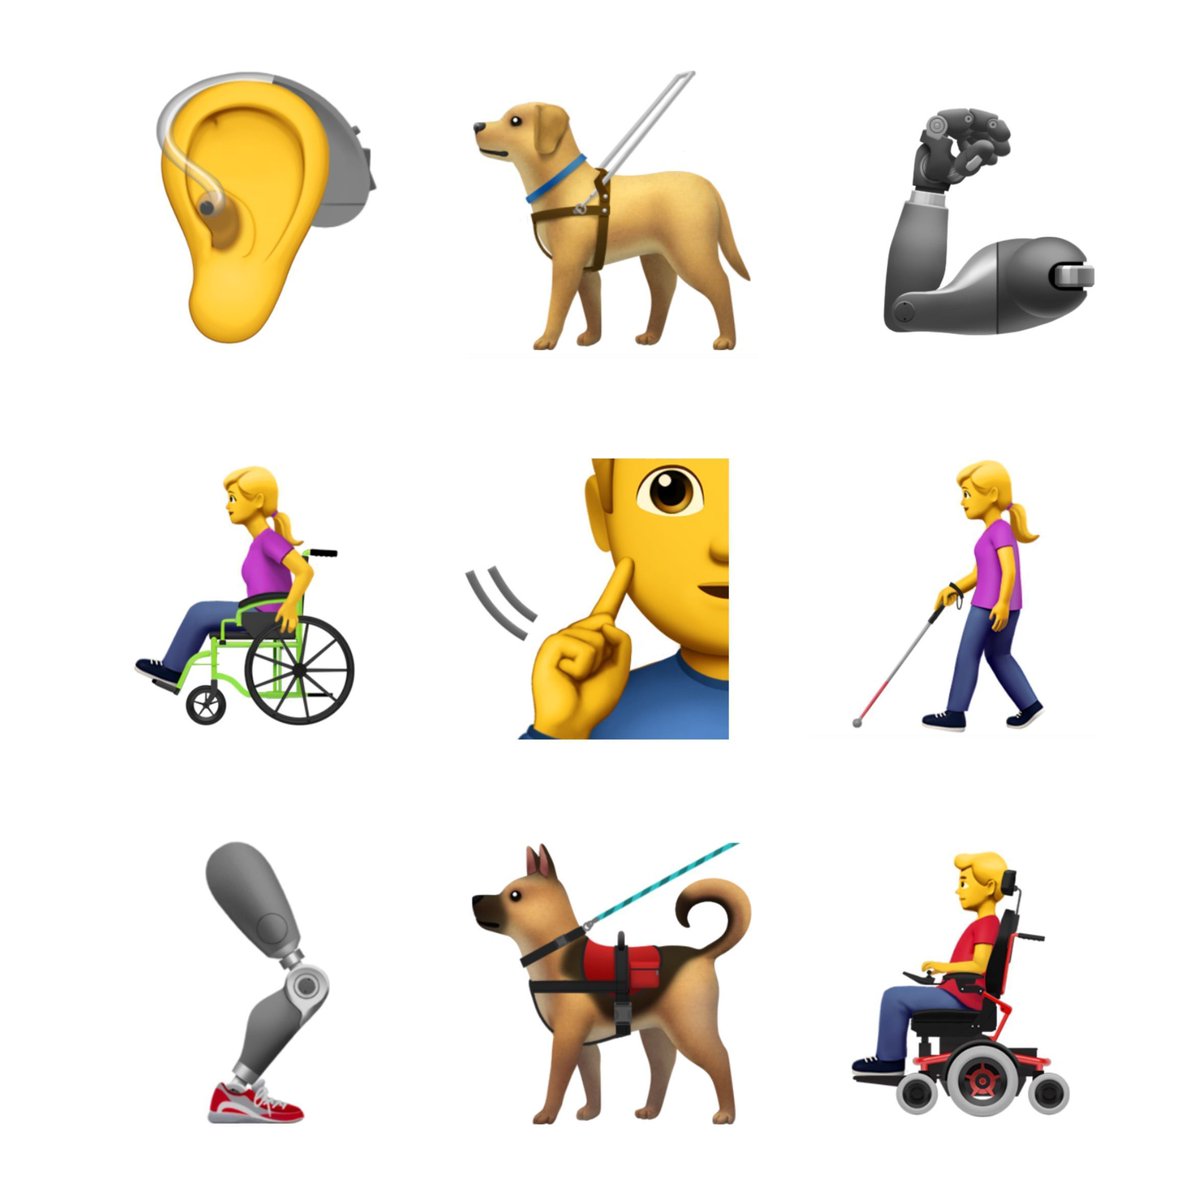 🆕 📲 New: Apple has submitted a proposal to Unicode for accessibility emojis including people in wheelchairs, service dogs, and prosthetic limbs. If approved, they'll be on phones next year blog.emojipedia.org/apple-proposes…